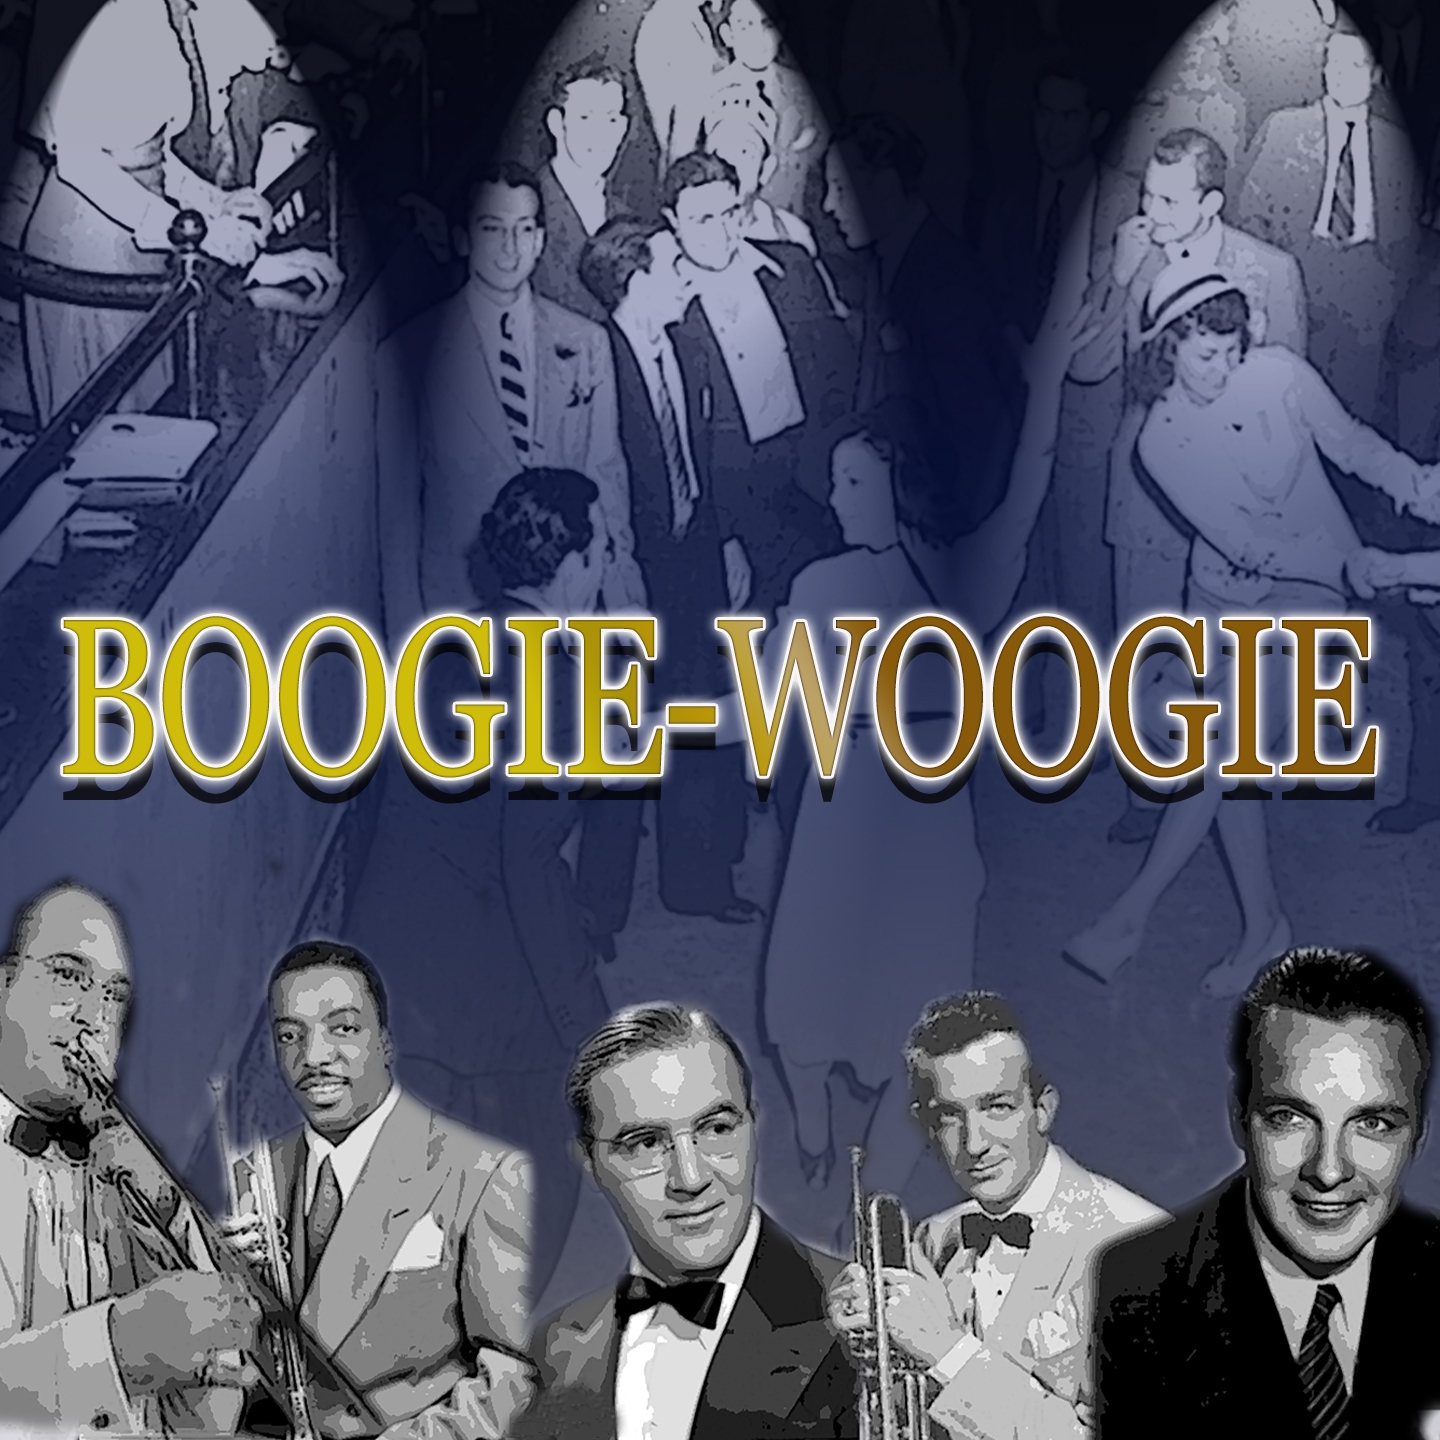 Boogie-Woogie: They All Played Boogie-Woogie